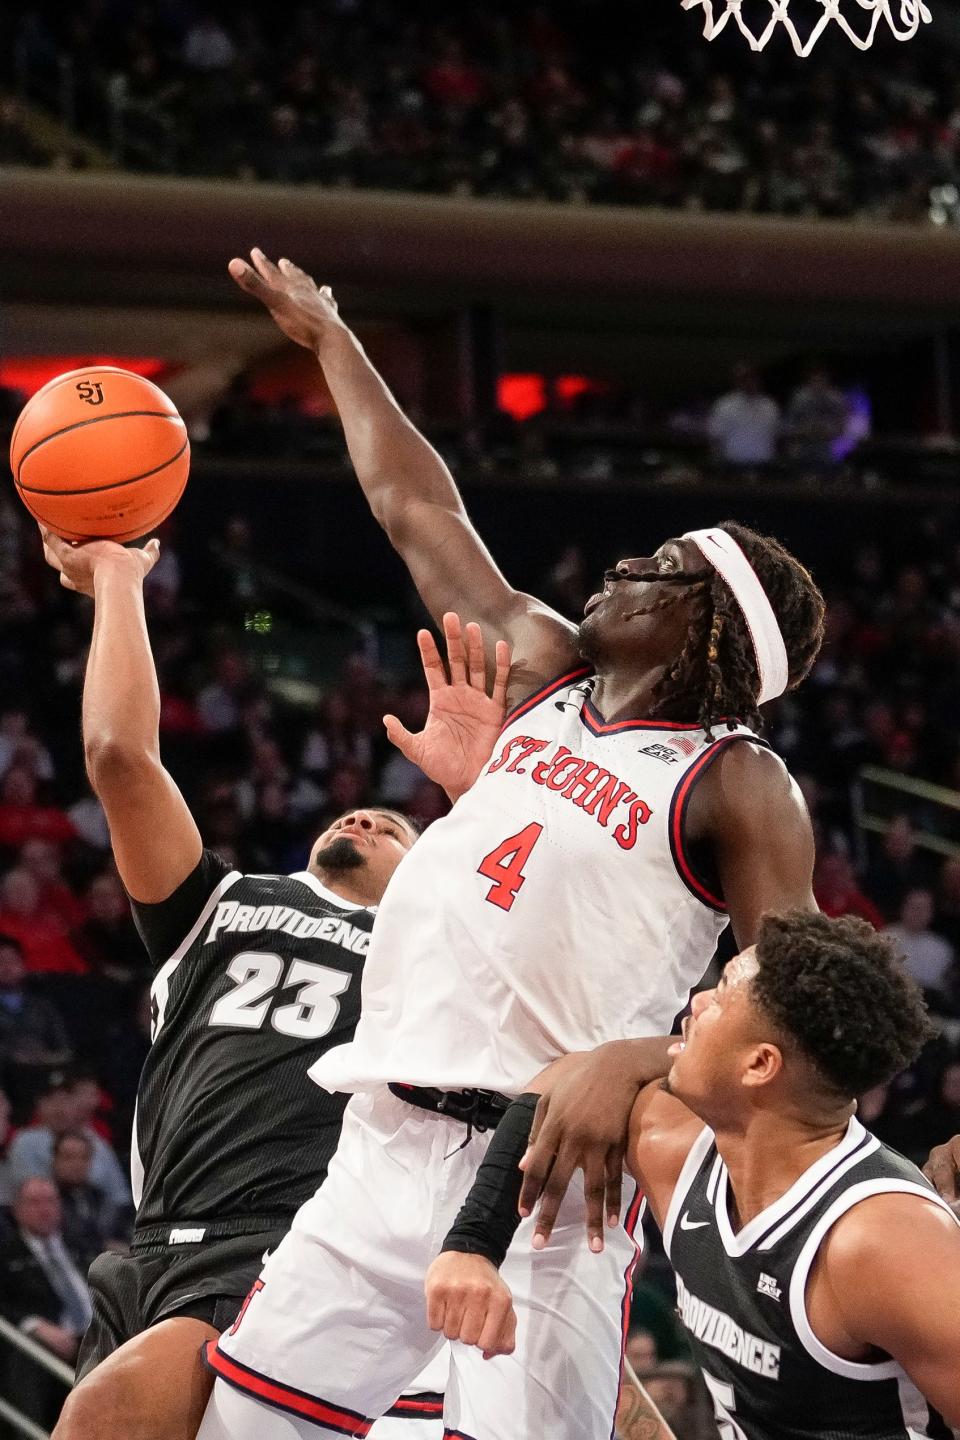 St. John's forward O'Mar Stanley (4) blocks the shot of Providence forward Bryce Hopkins (23) during the first half of an NCAA college basketball game, Saturday, Feb. 11, 2023 in New York. (AP Photo/Bryan Woolston)